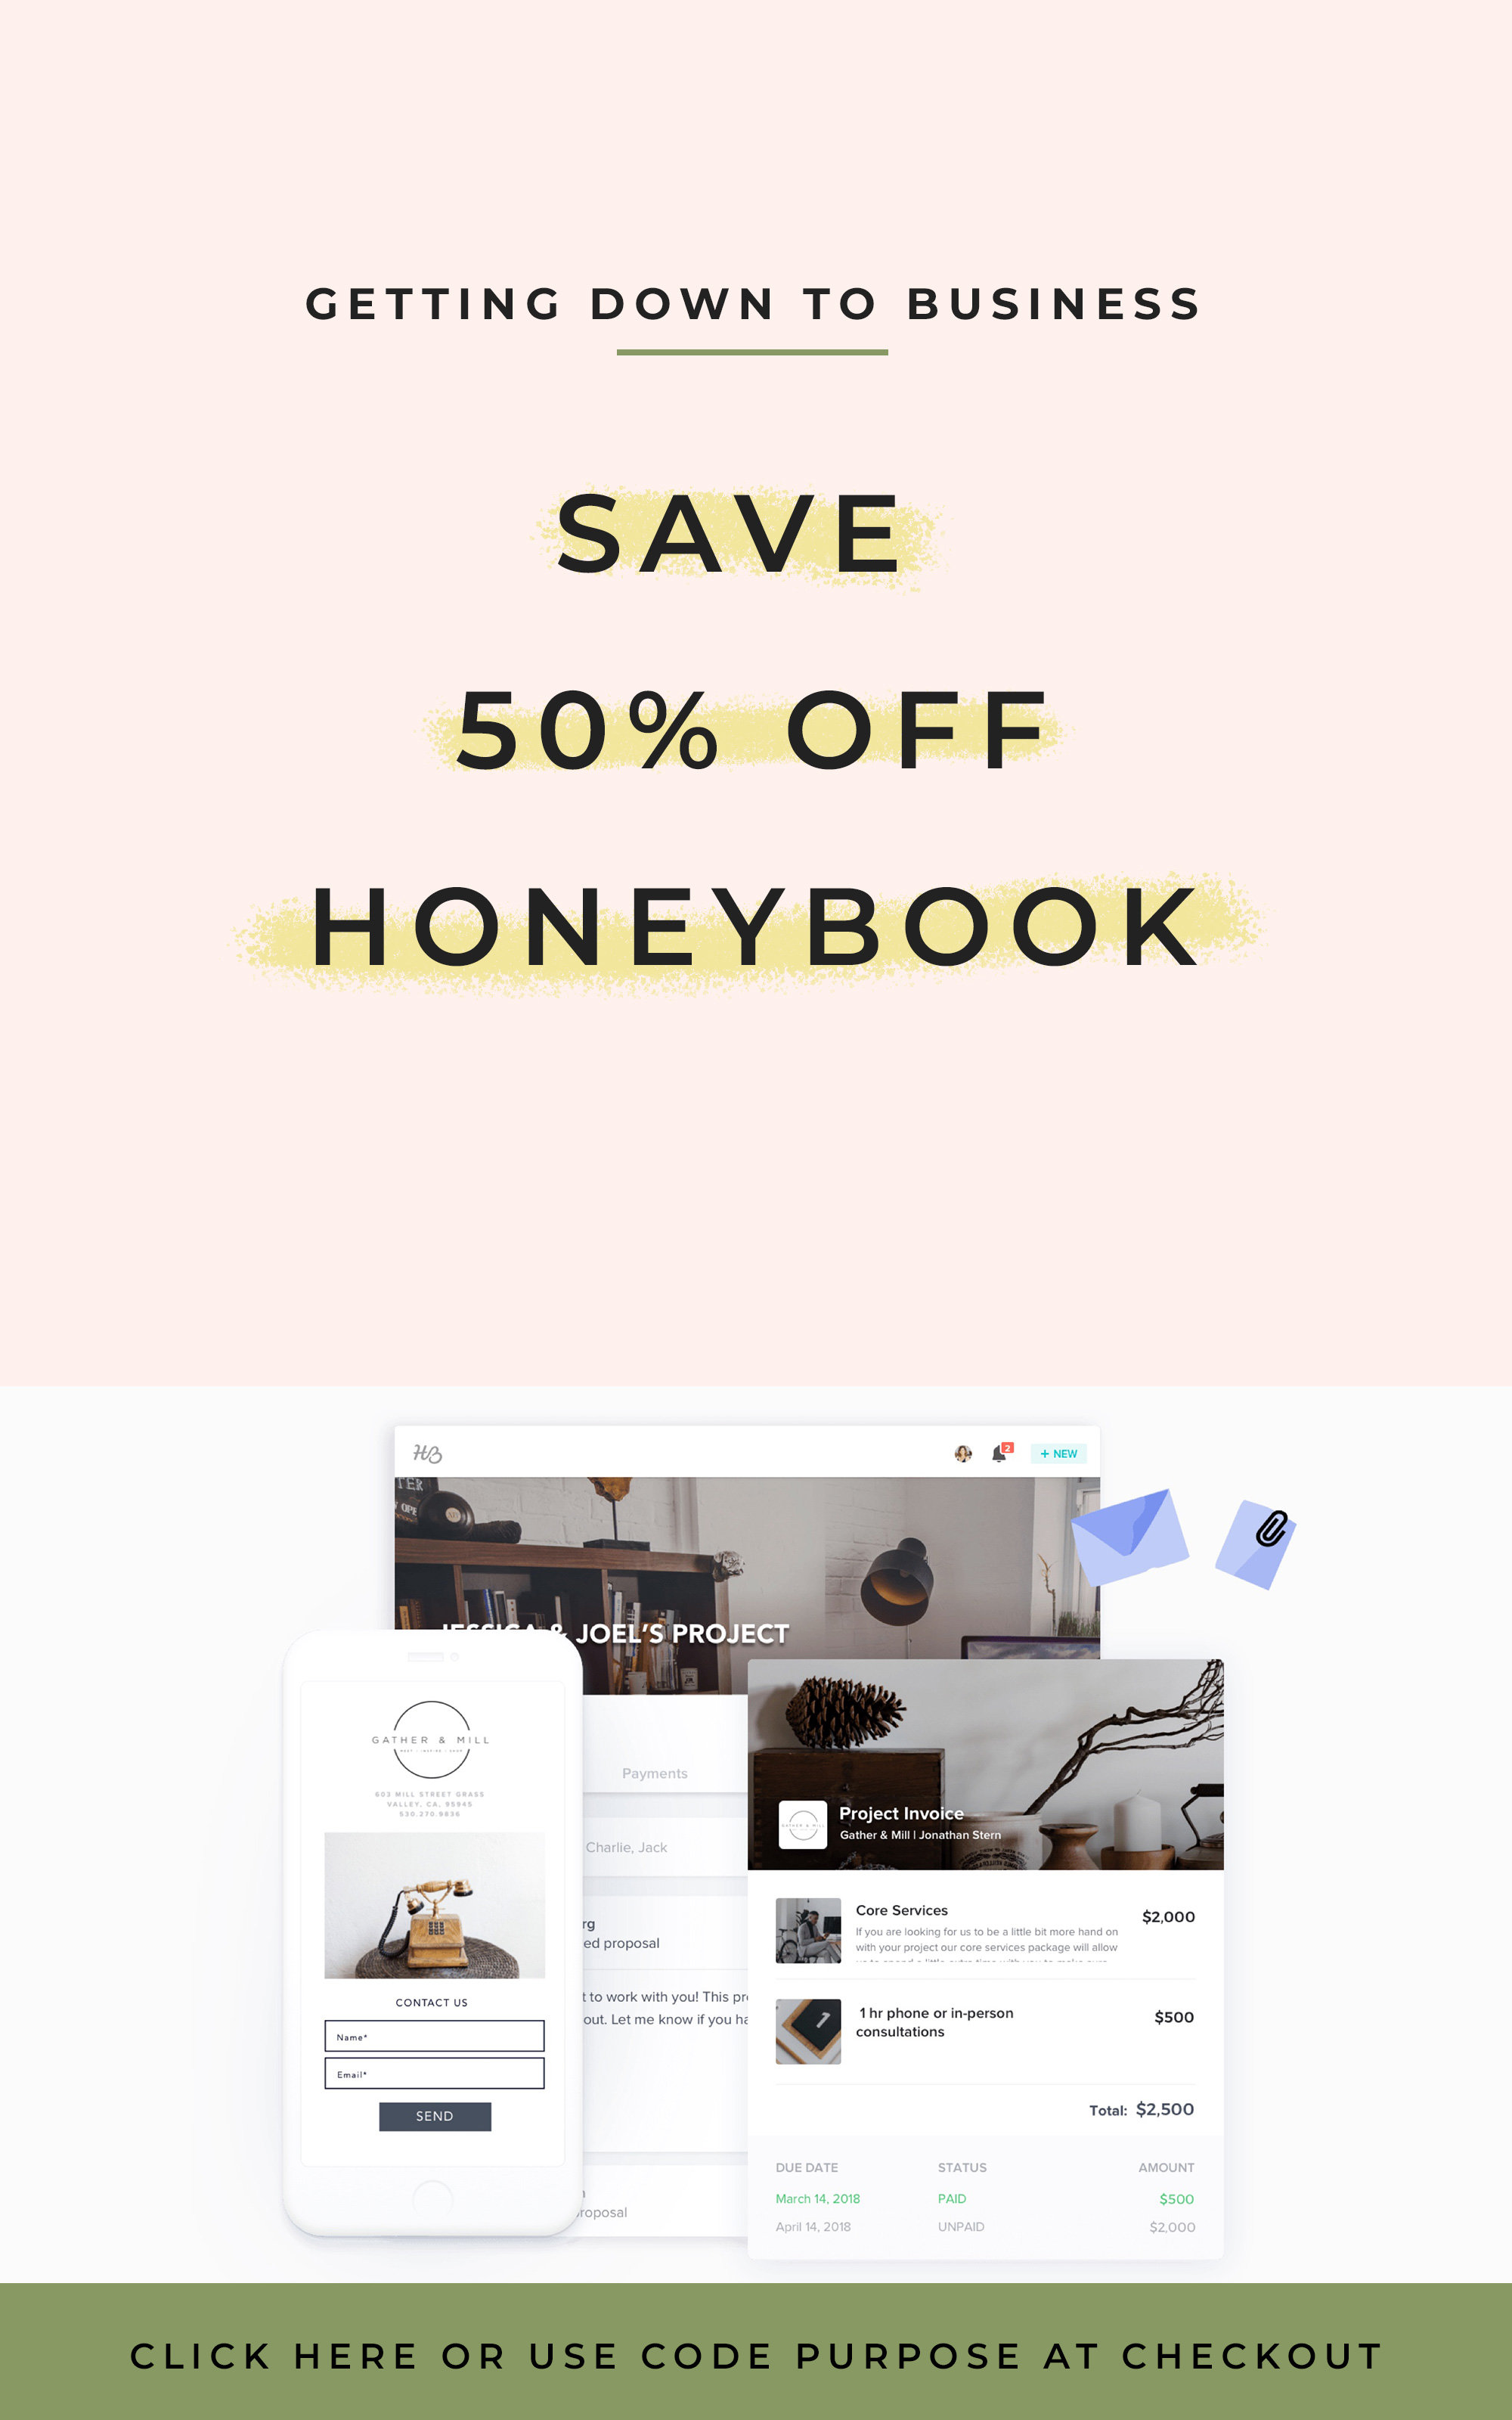 Honeybook is a client management systems that lets you automate your sales process. Use this 50% off Honeybook Promo code to receive $200 off your first year of Honeybook. Sign up for a trial below using the link and when you're ready, you'll automatically get 50% off! #weddingpros #weddingplanner #weddingphotographer #candicecoppola